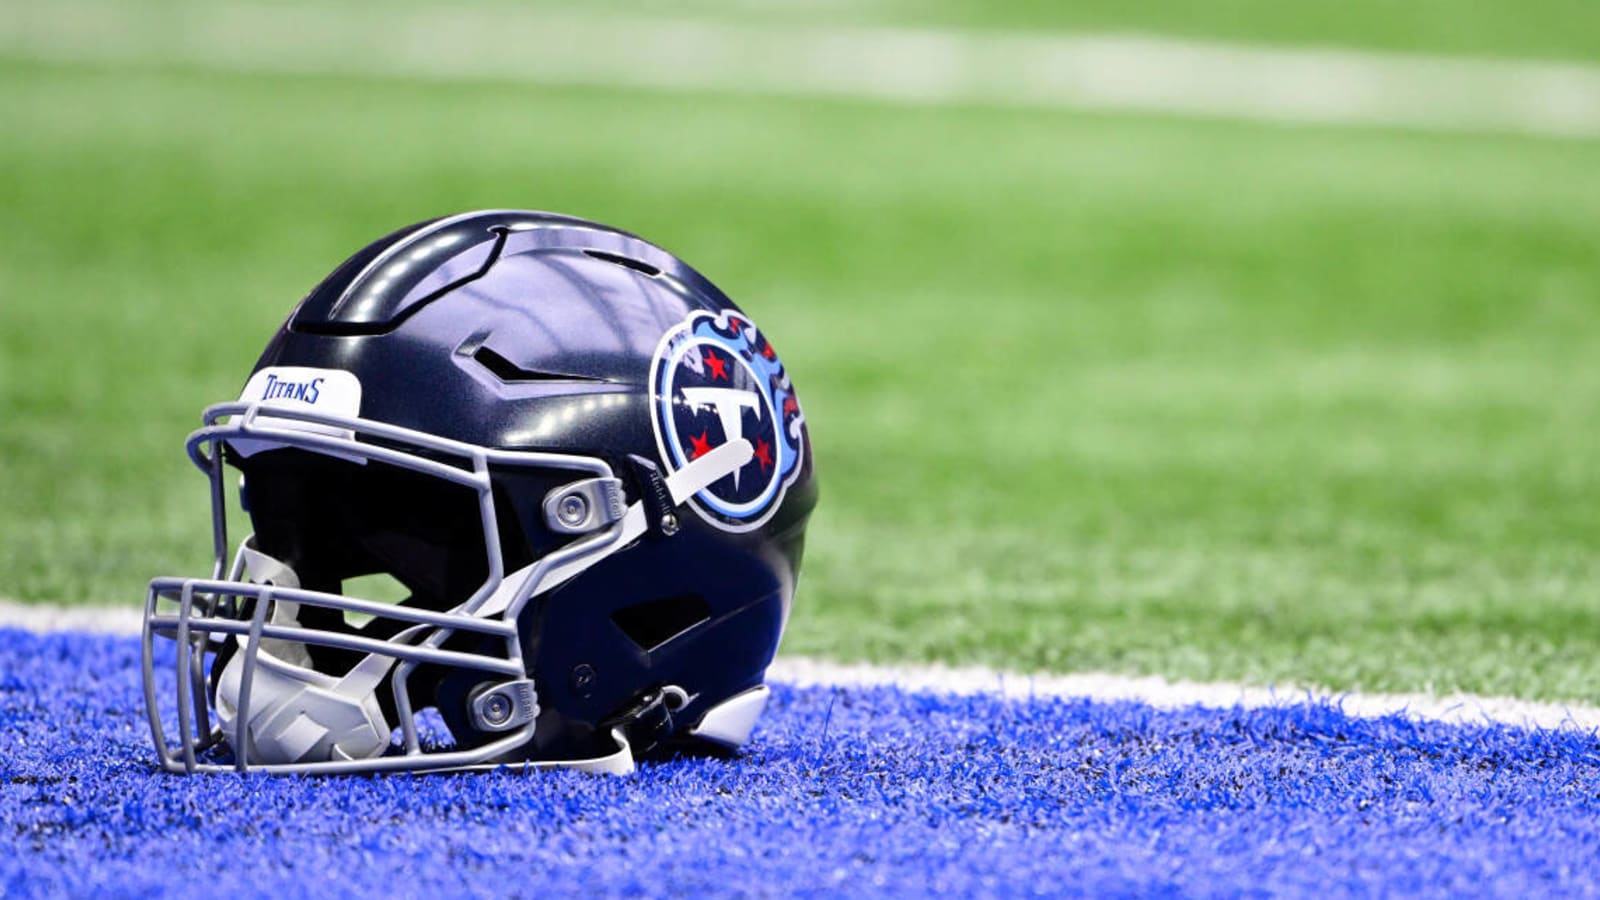 Titans bring back a player who dissed them